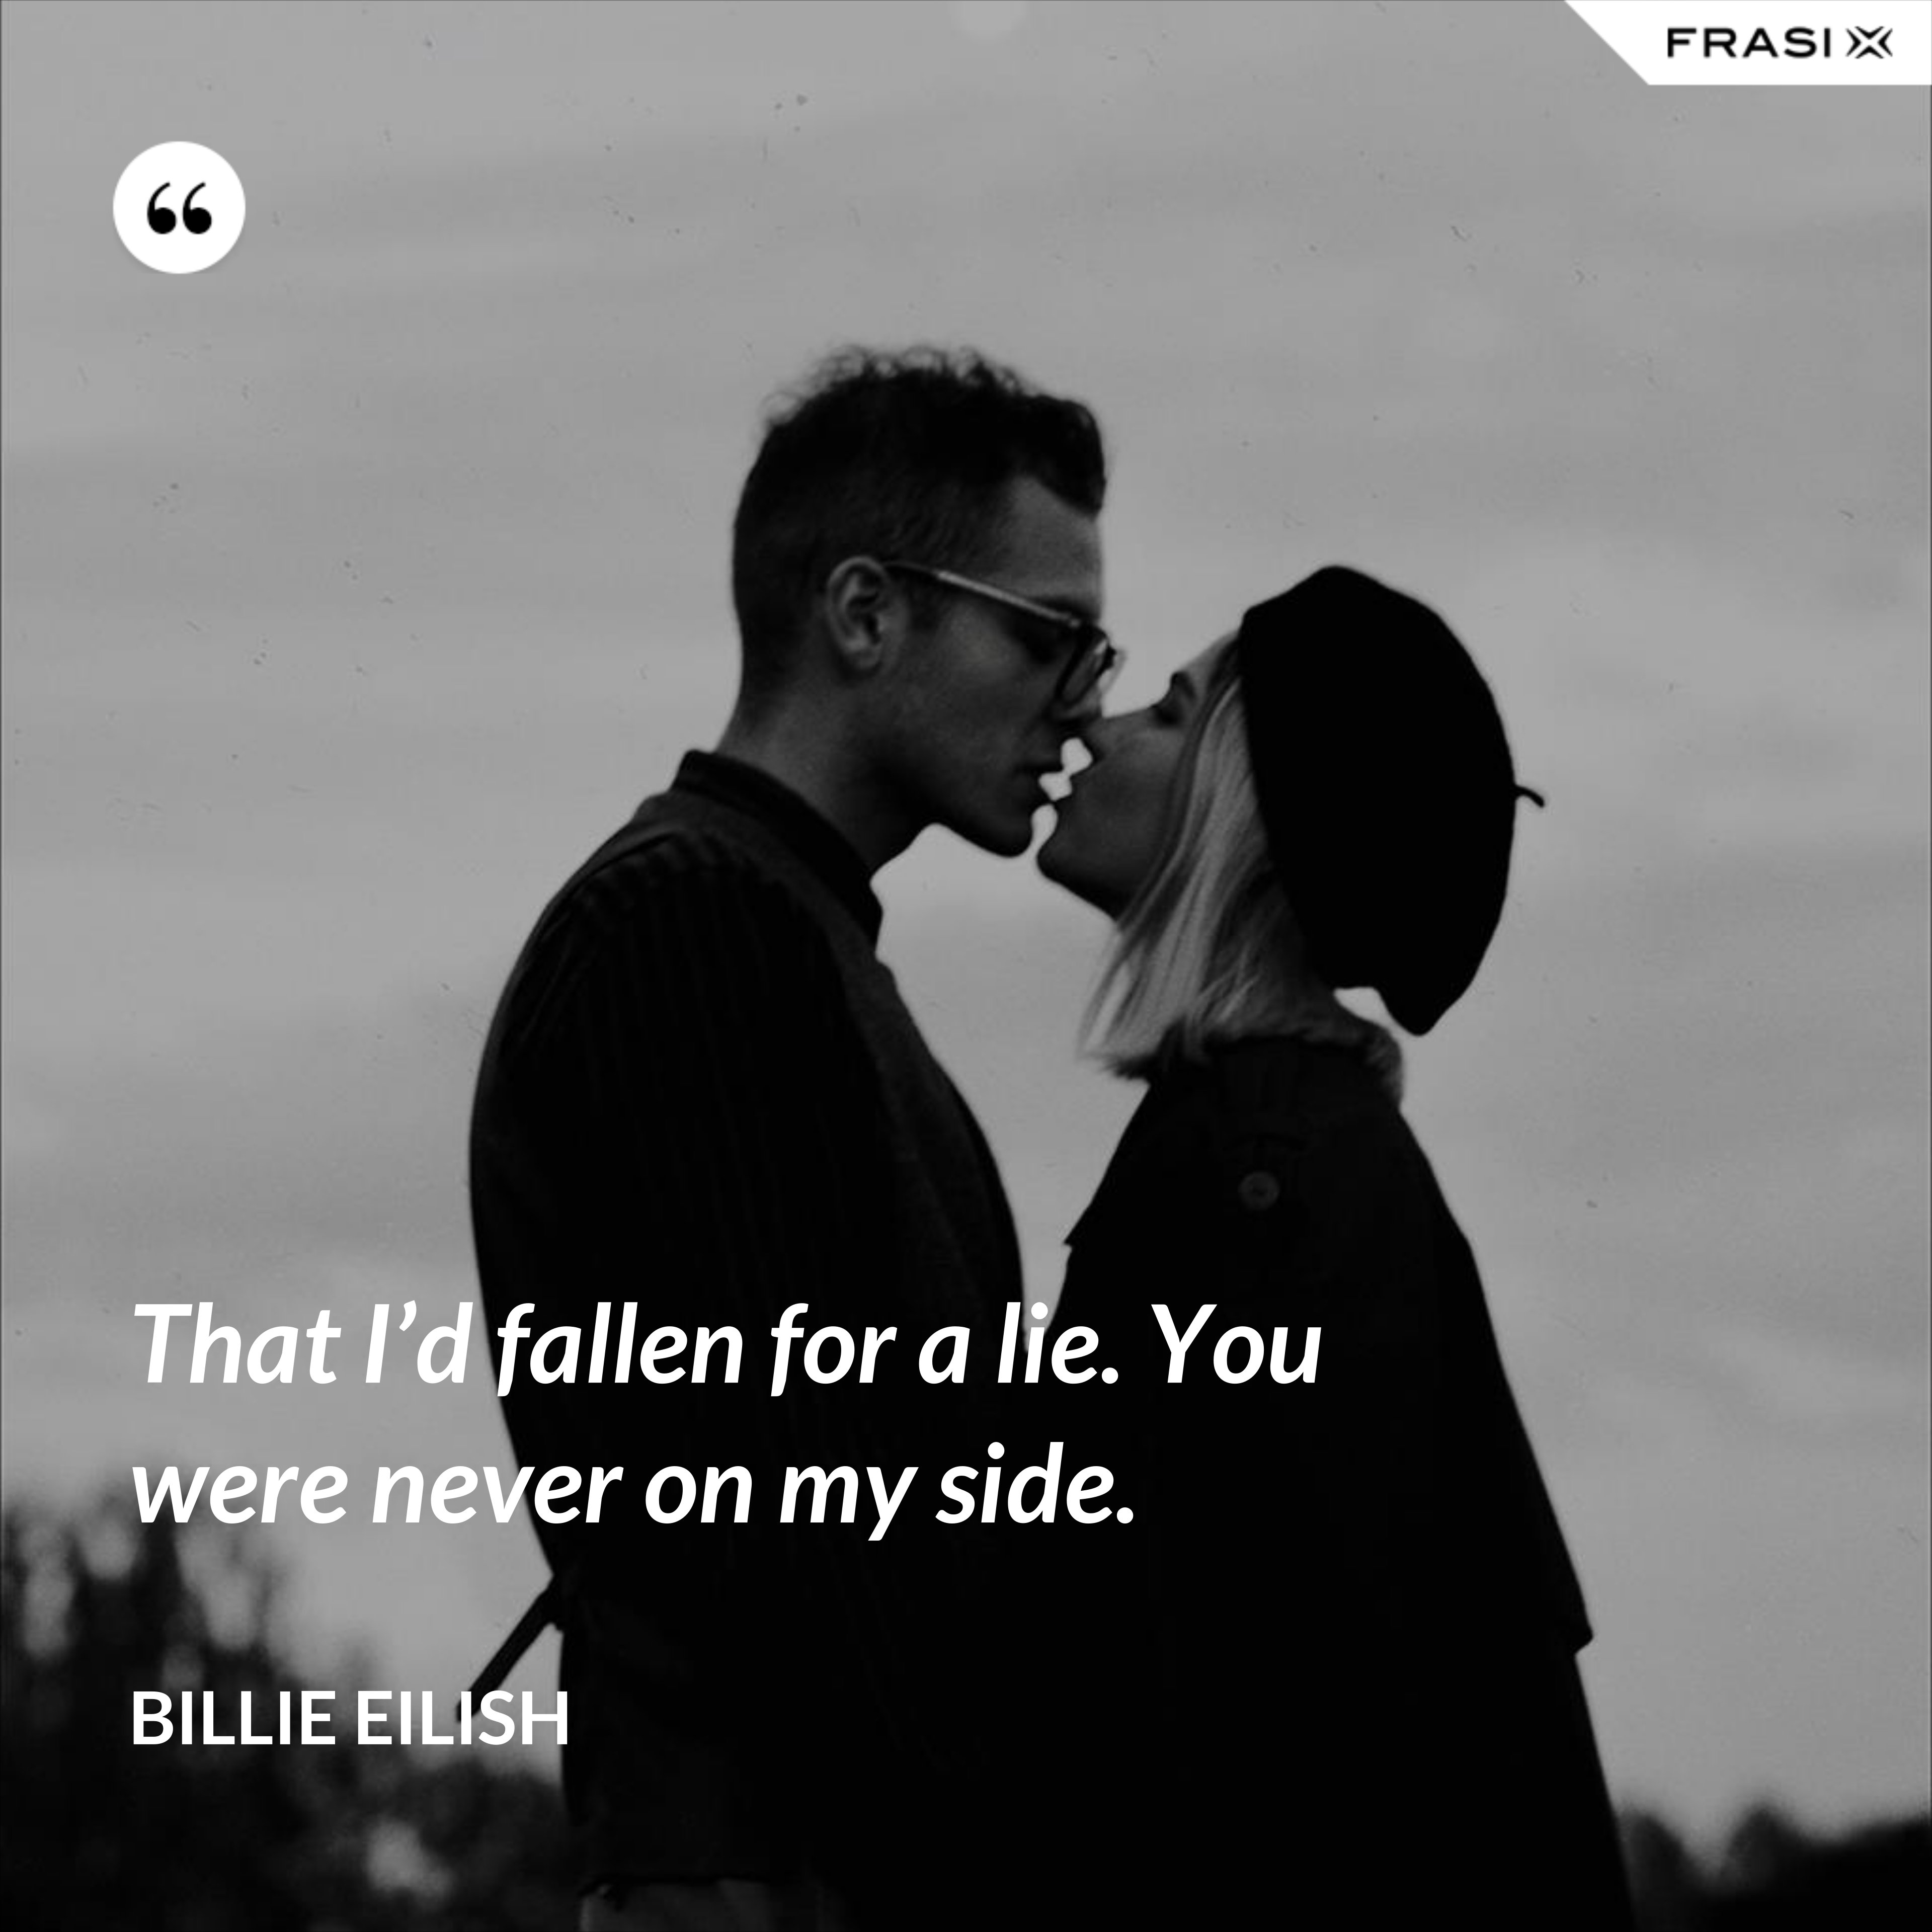 That I’d fallen for a lie. You were never on my side. - Billie Eilish